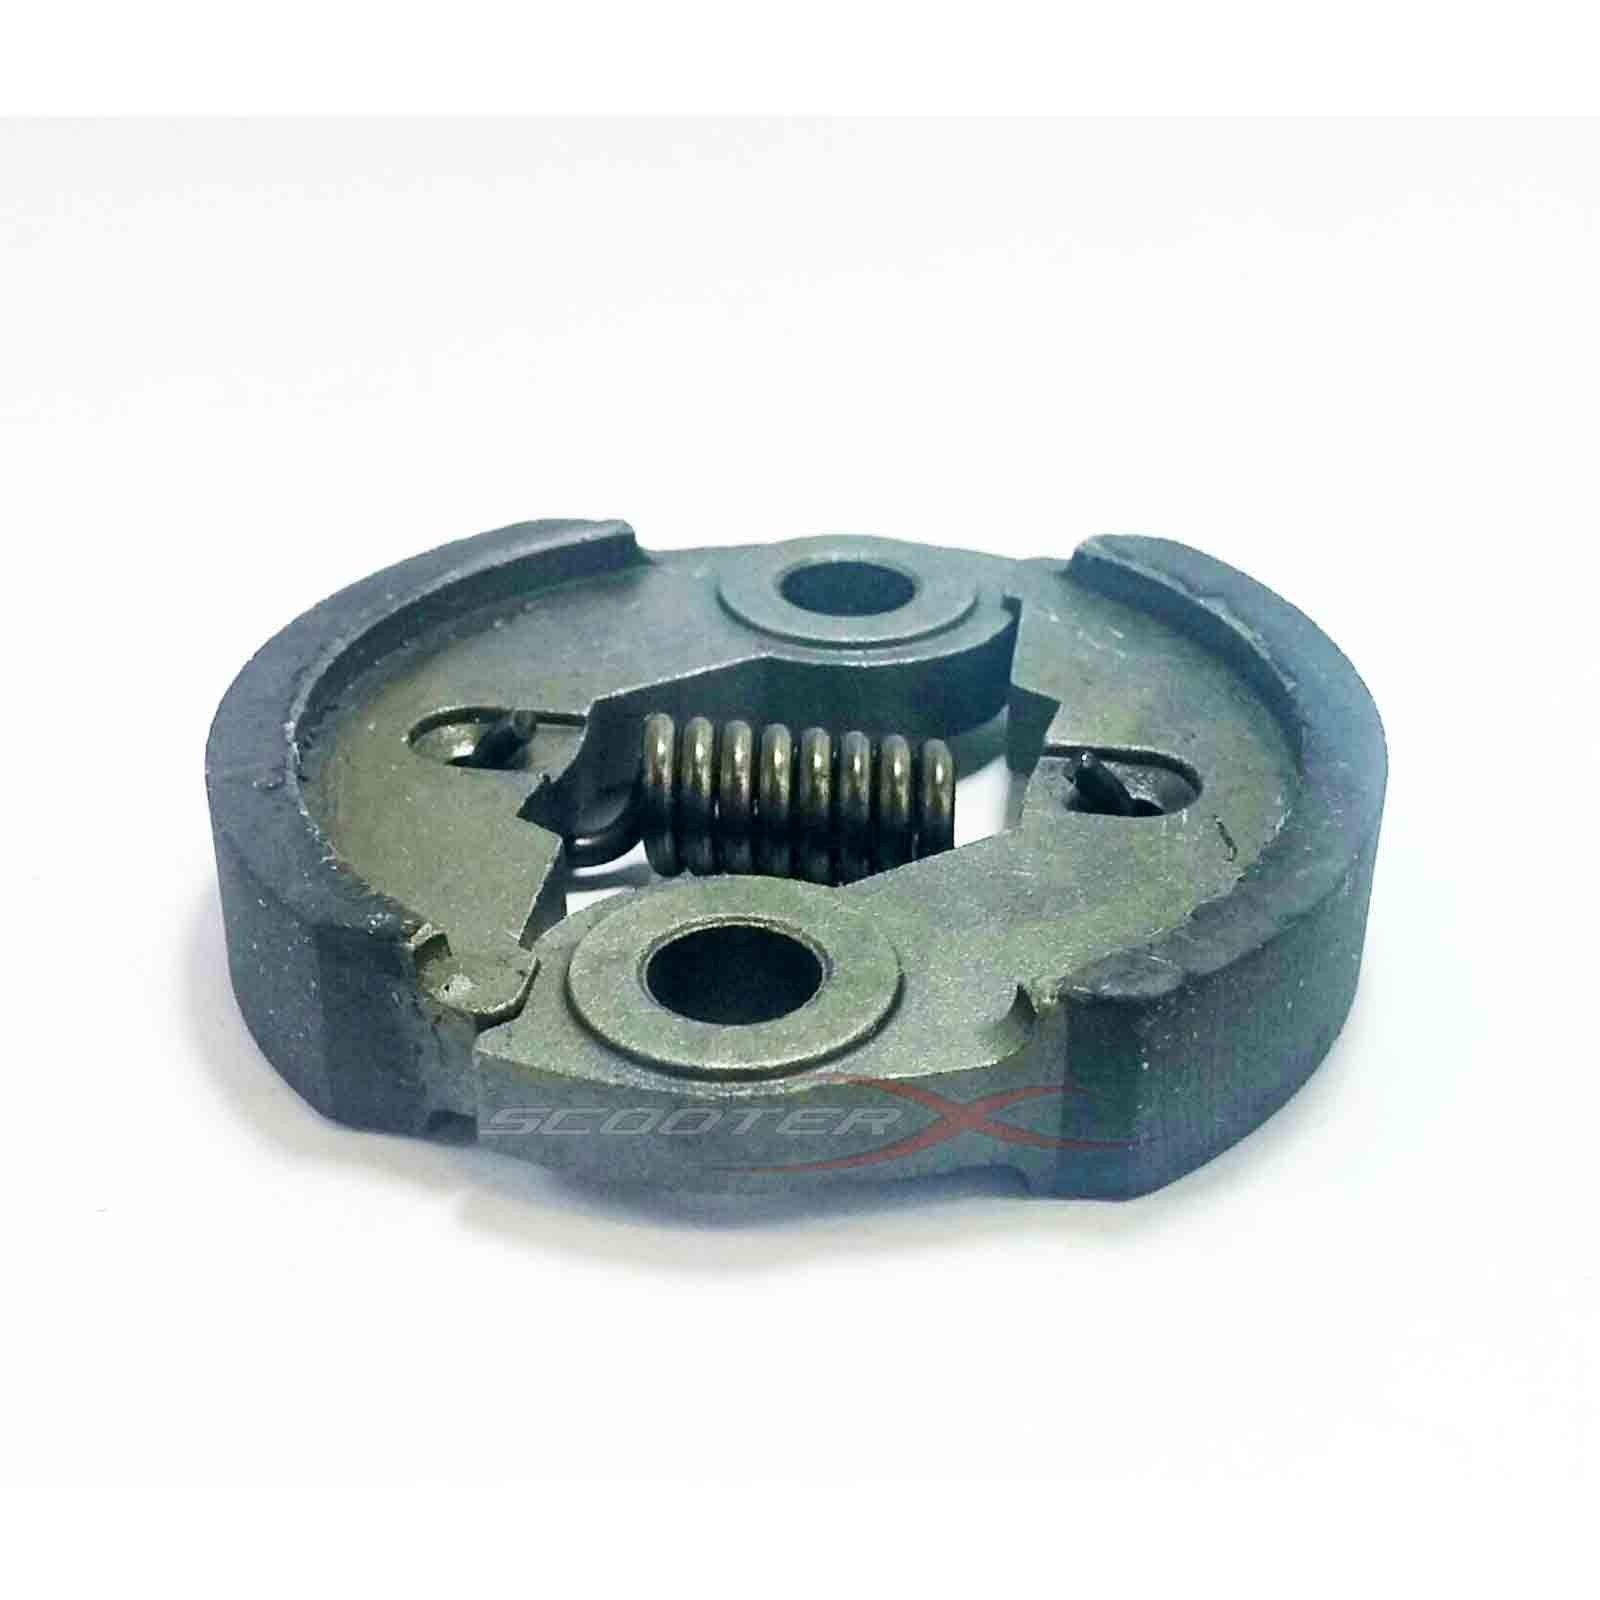 ScooterX CLUTCH SHOES For Dirt Dog, X-Racer, Huasheng Style Engines